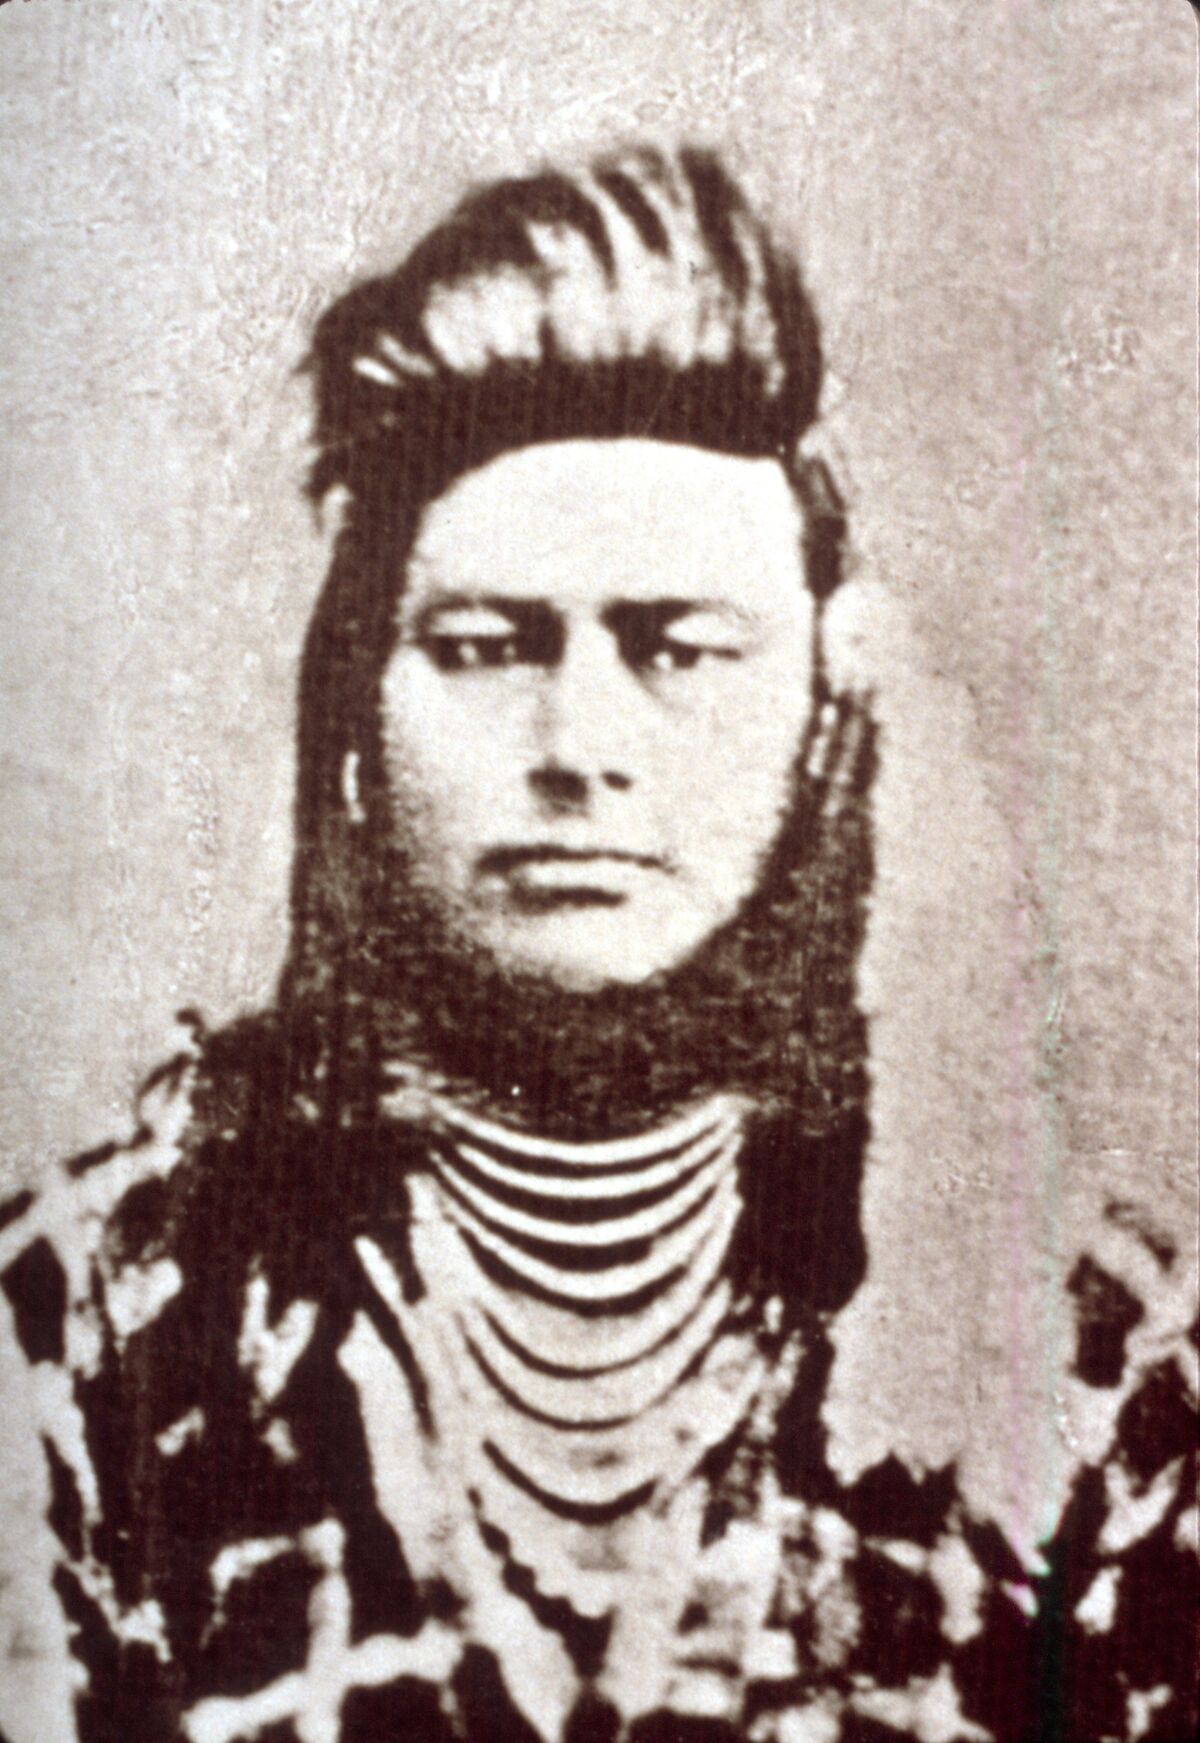 Photograph of Ollokot, closely cropped from the larger portrait in slide 035, taken in 1877 by Chas. W. Phillips in Walla Walla.